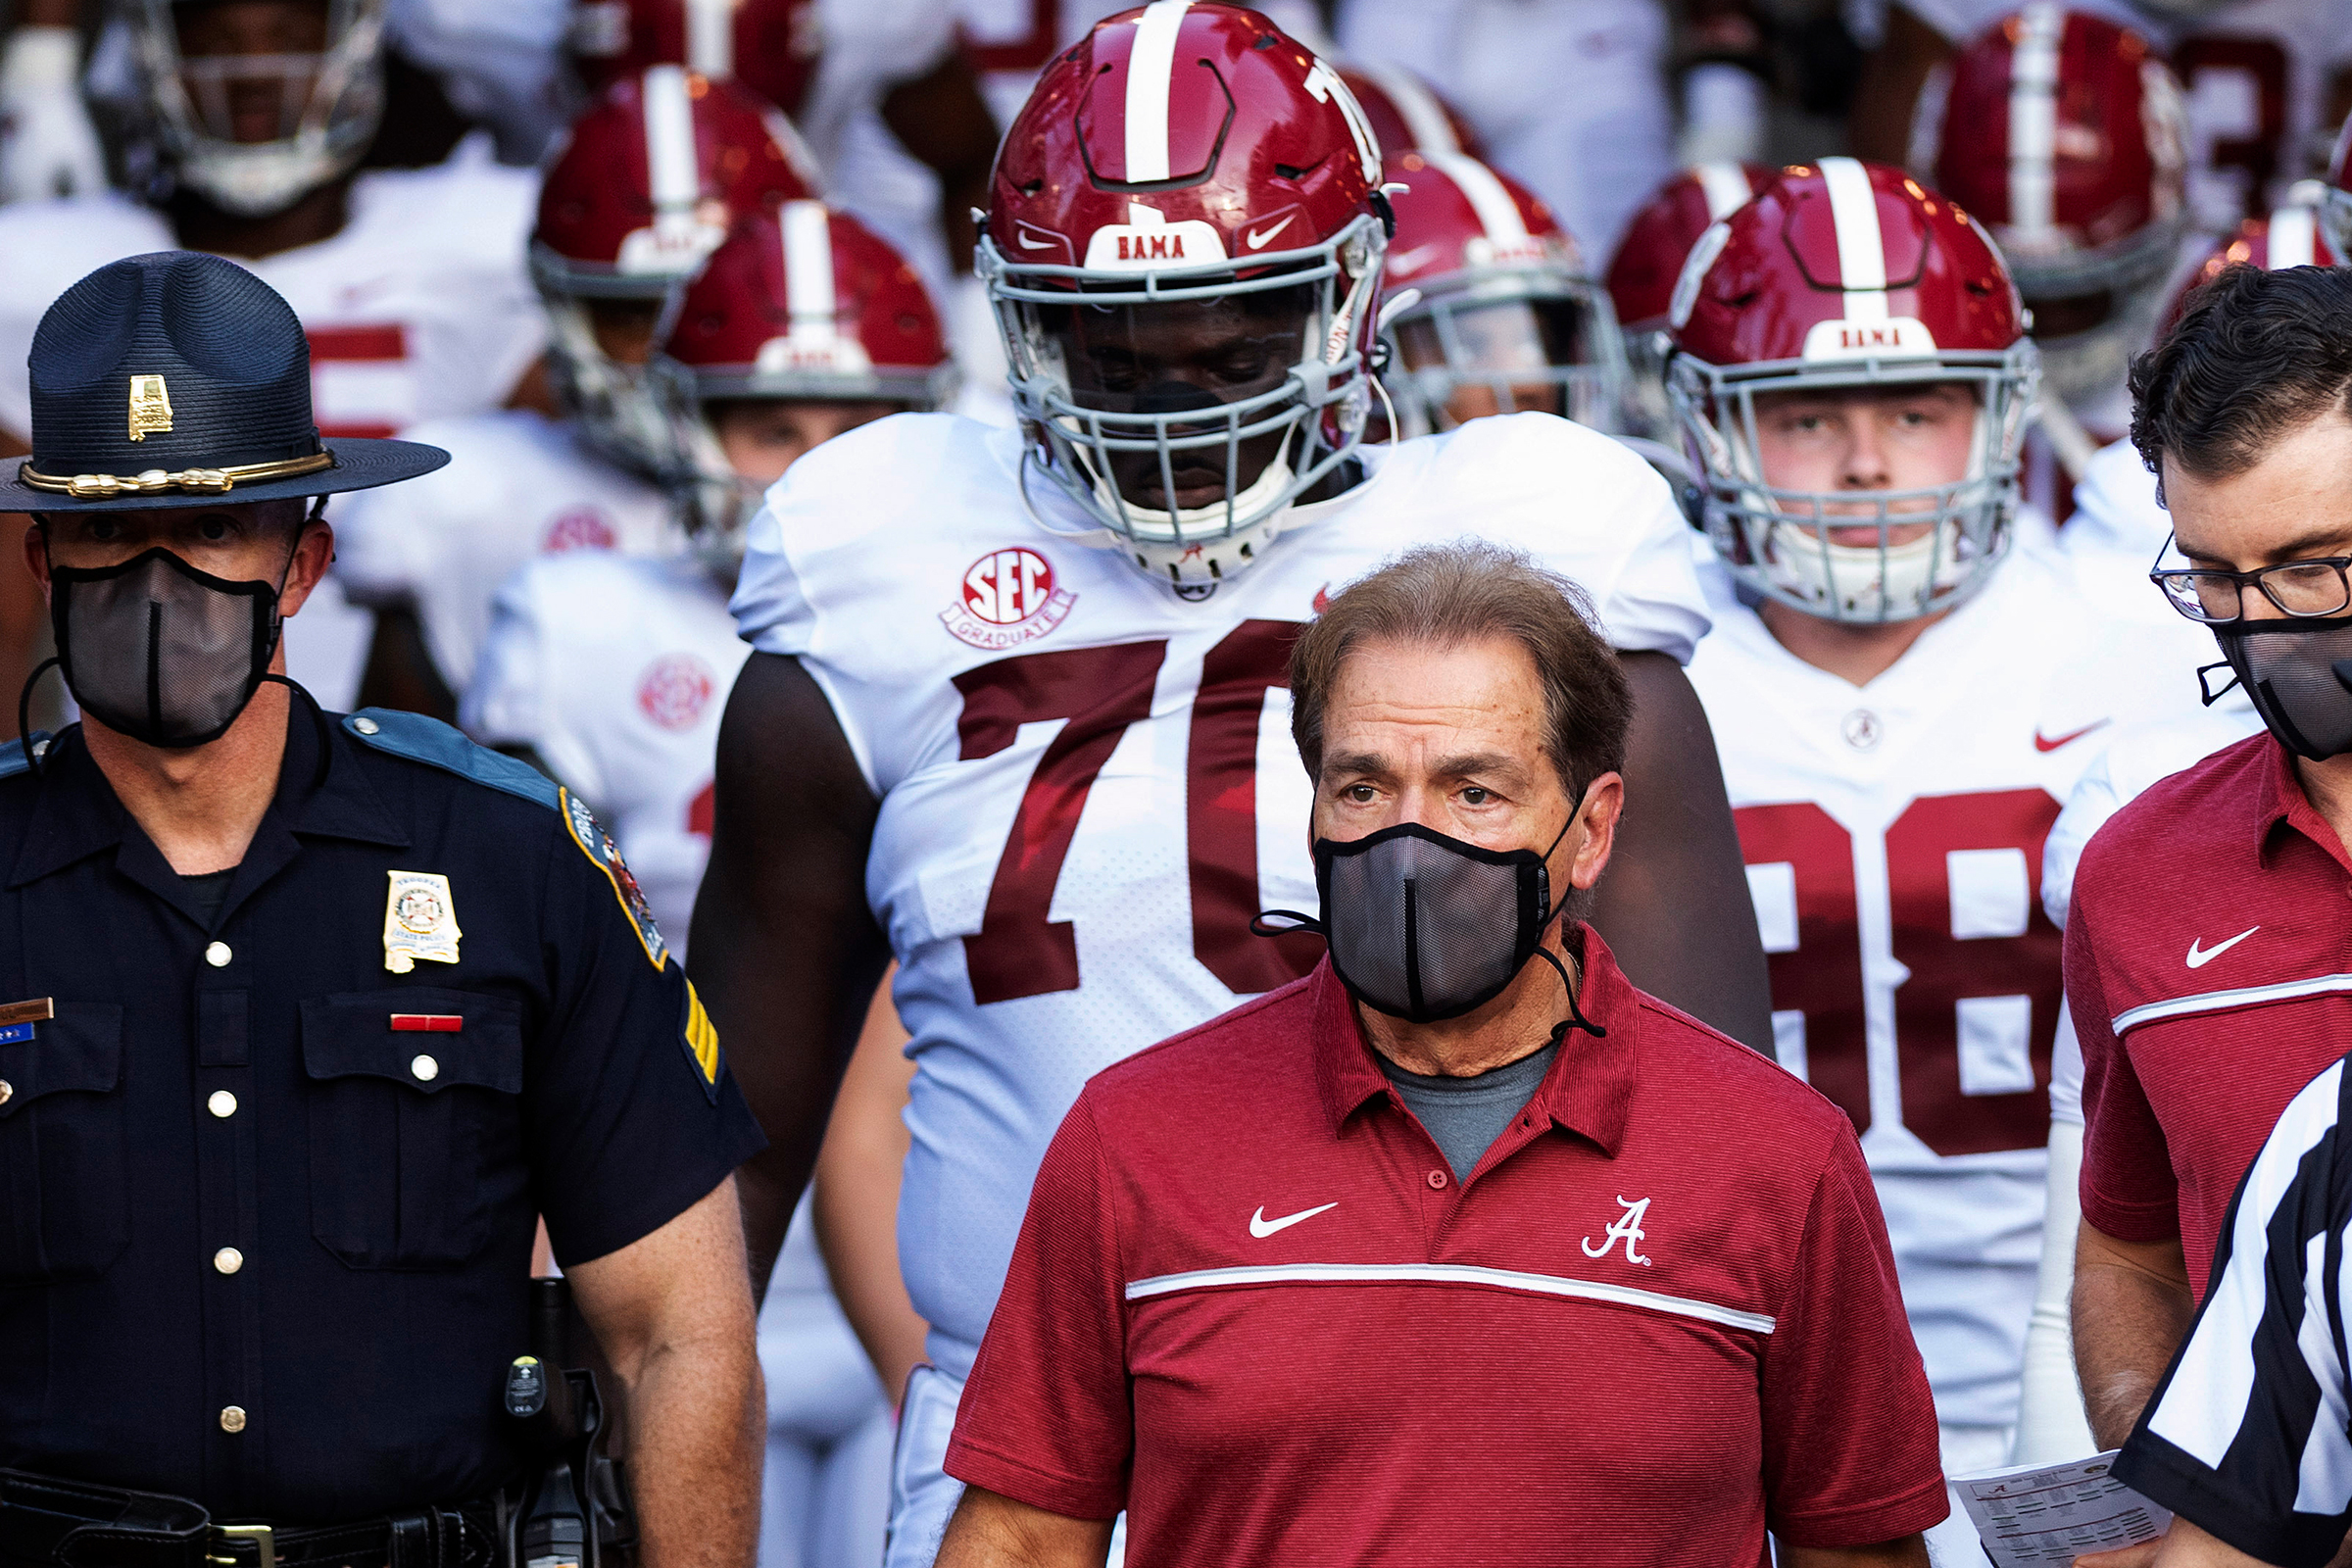 Alabama coach Nick Saban leads his team to the field before an NCAA college football game against Missouri in Columbia, Mo., on Sept. 26, 2020. Saban and athletic director Greg Byrne tested positive for COVID-19, days before the Southeastern Conference's biggest regular-season showdown.